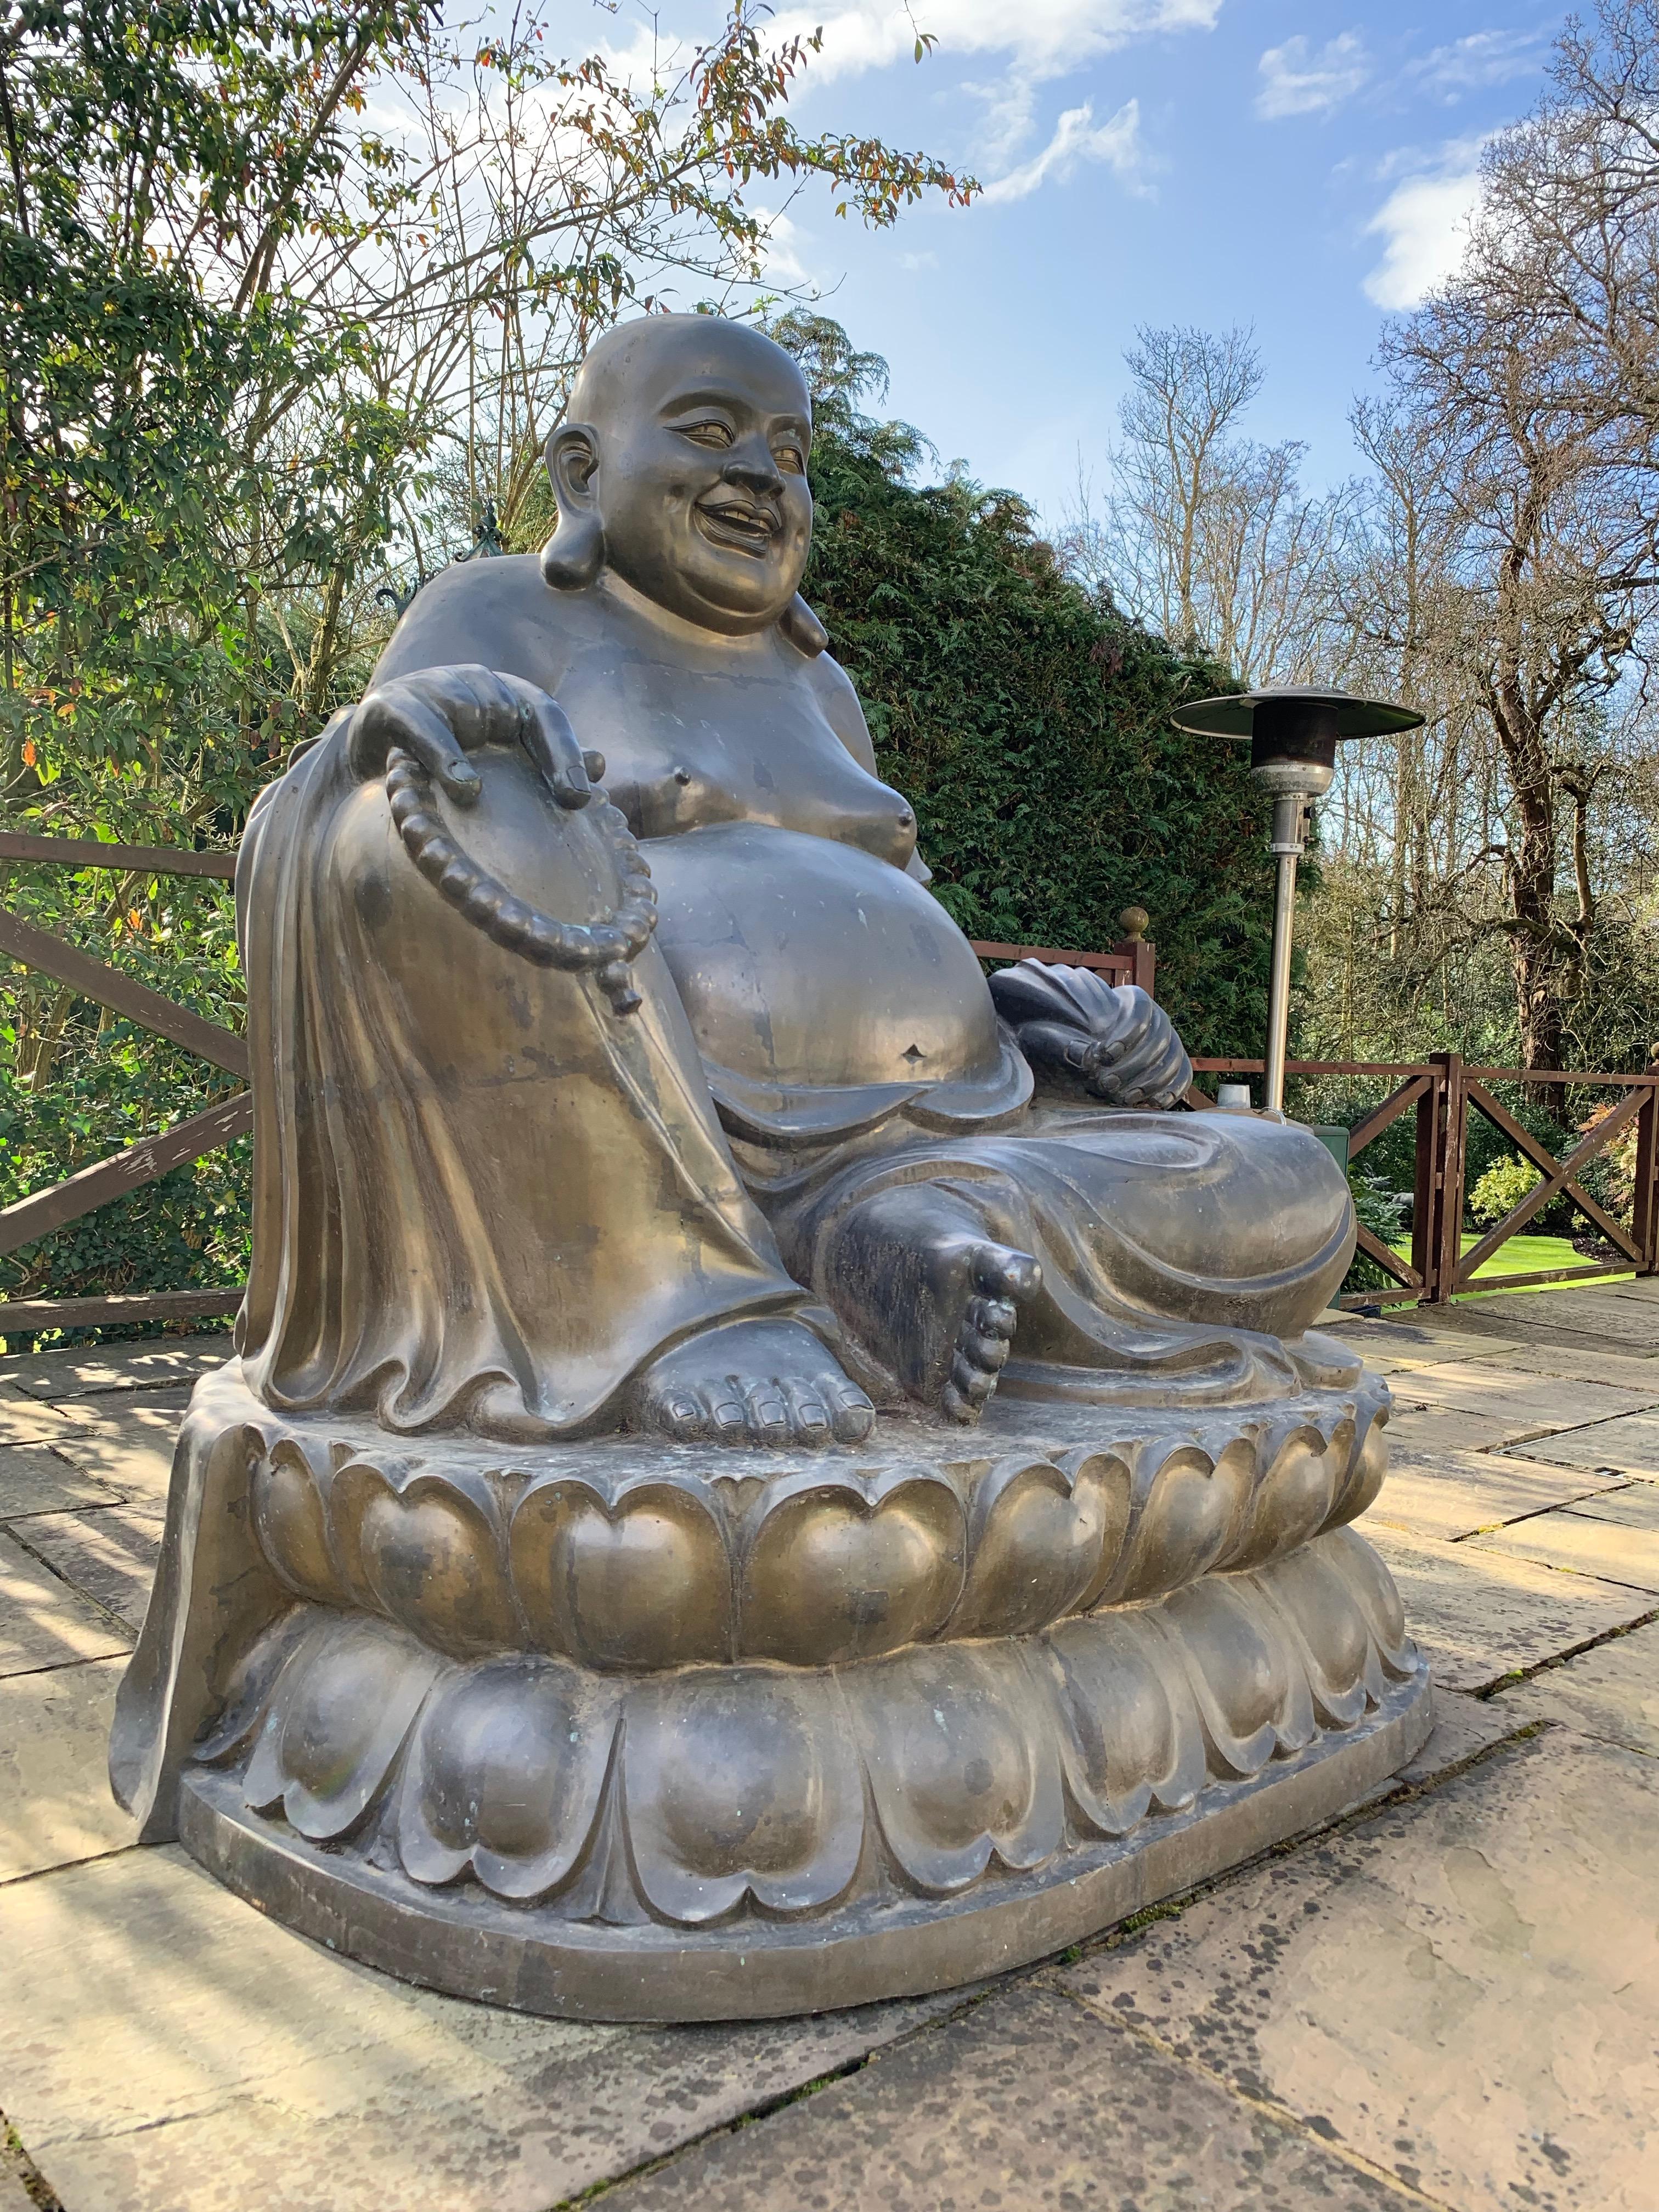 A large 20th century bronze laughing Budai originally from the New York apartment of John Legend, an American singer and songwriter.
Budai, Hotei or Pu-Tai is a semi-historical monk as well as deity who was introduced into the Japanese Buddhist